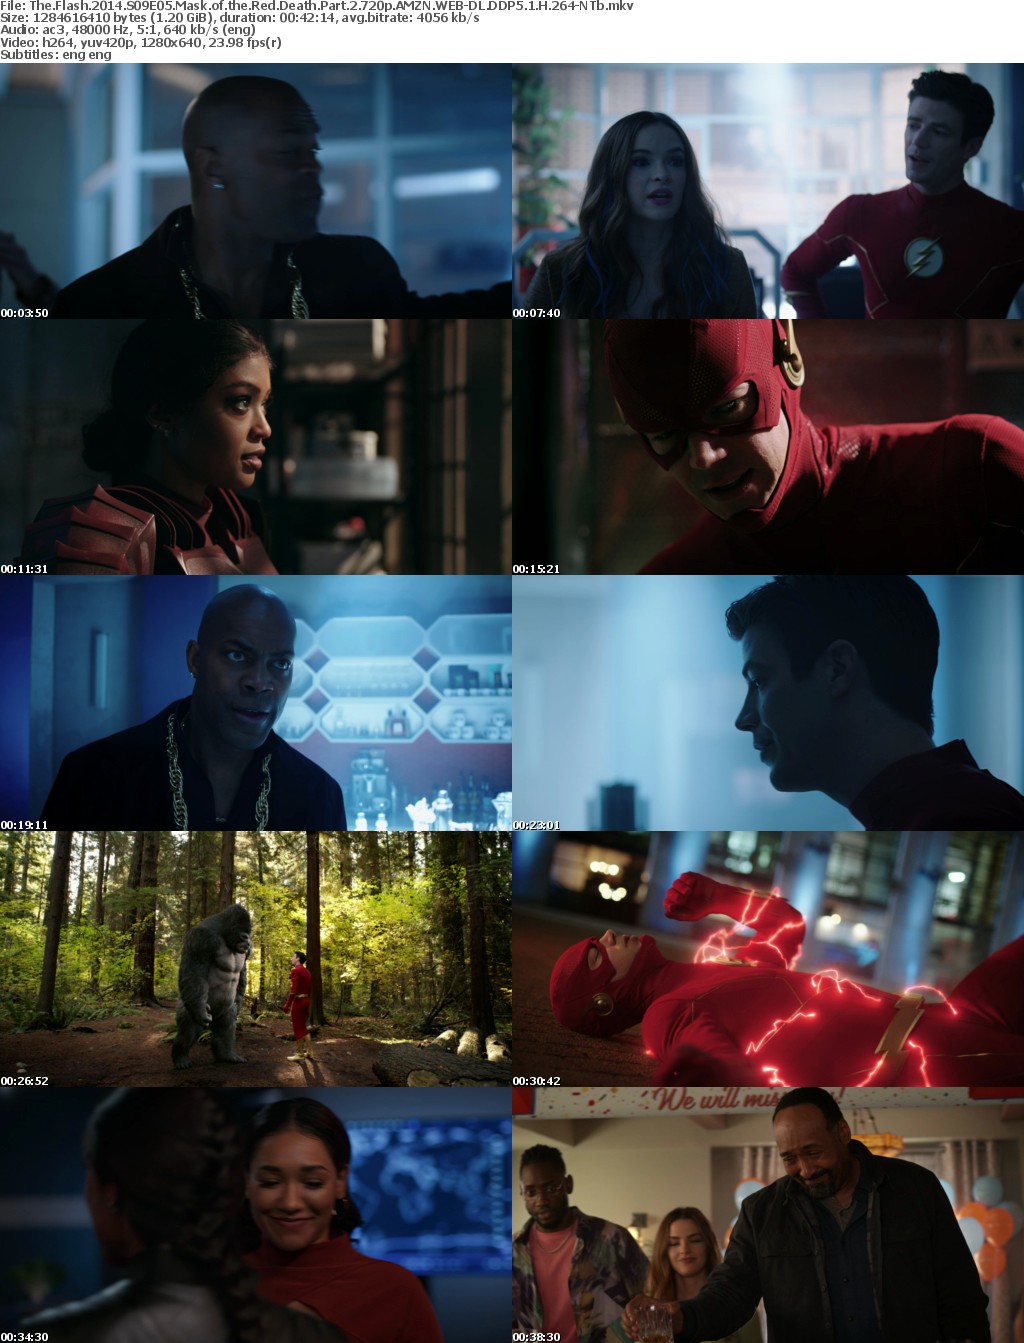 The Flash 2014 S09E05 Mask of the Red Death Part 2 720p AMZN WEBRip DDP5 1 x264-NTb